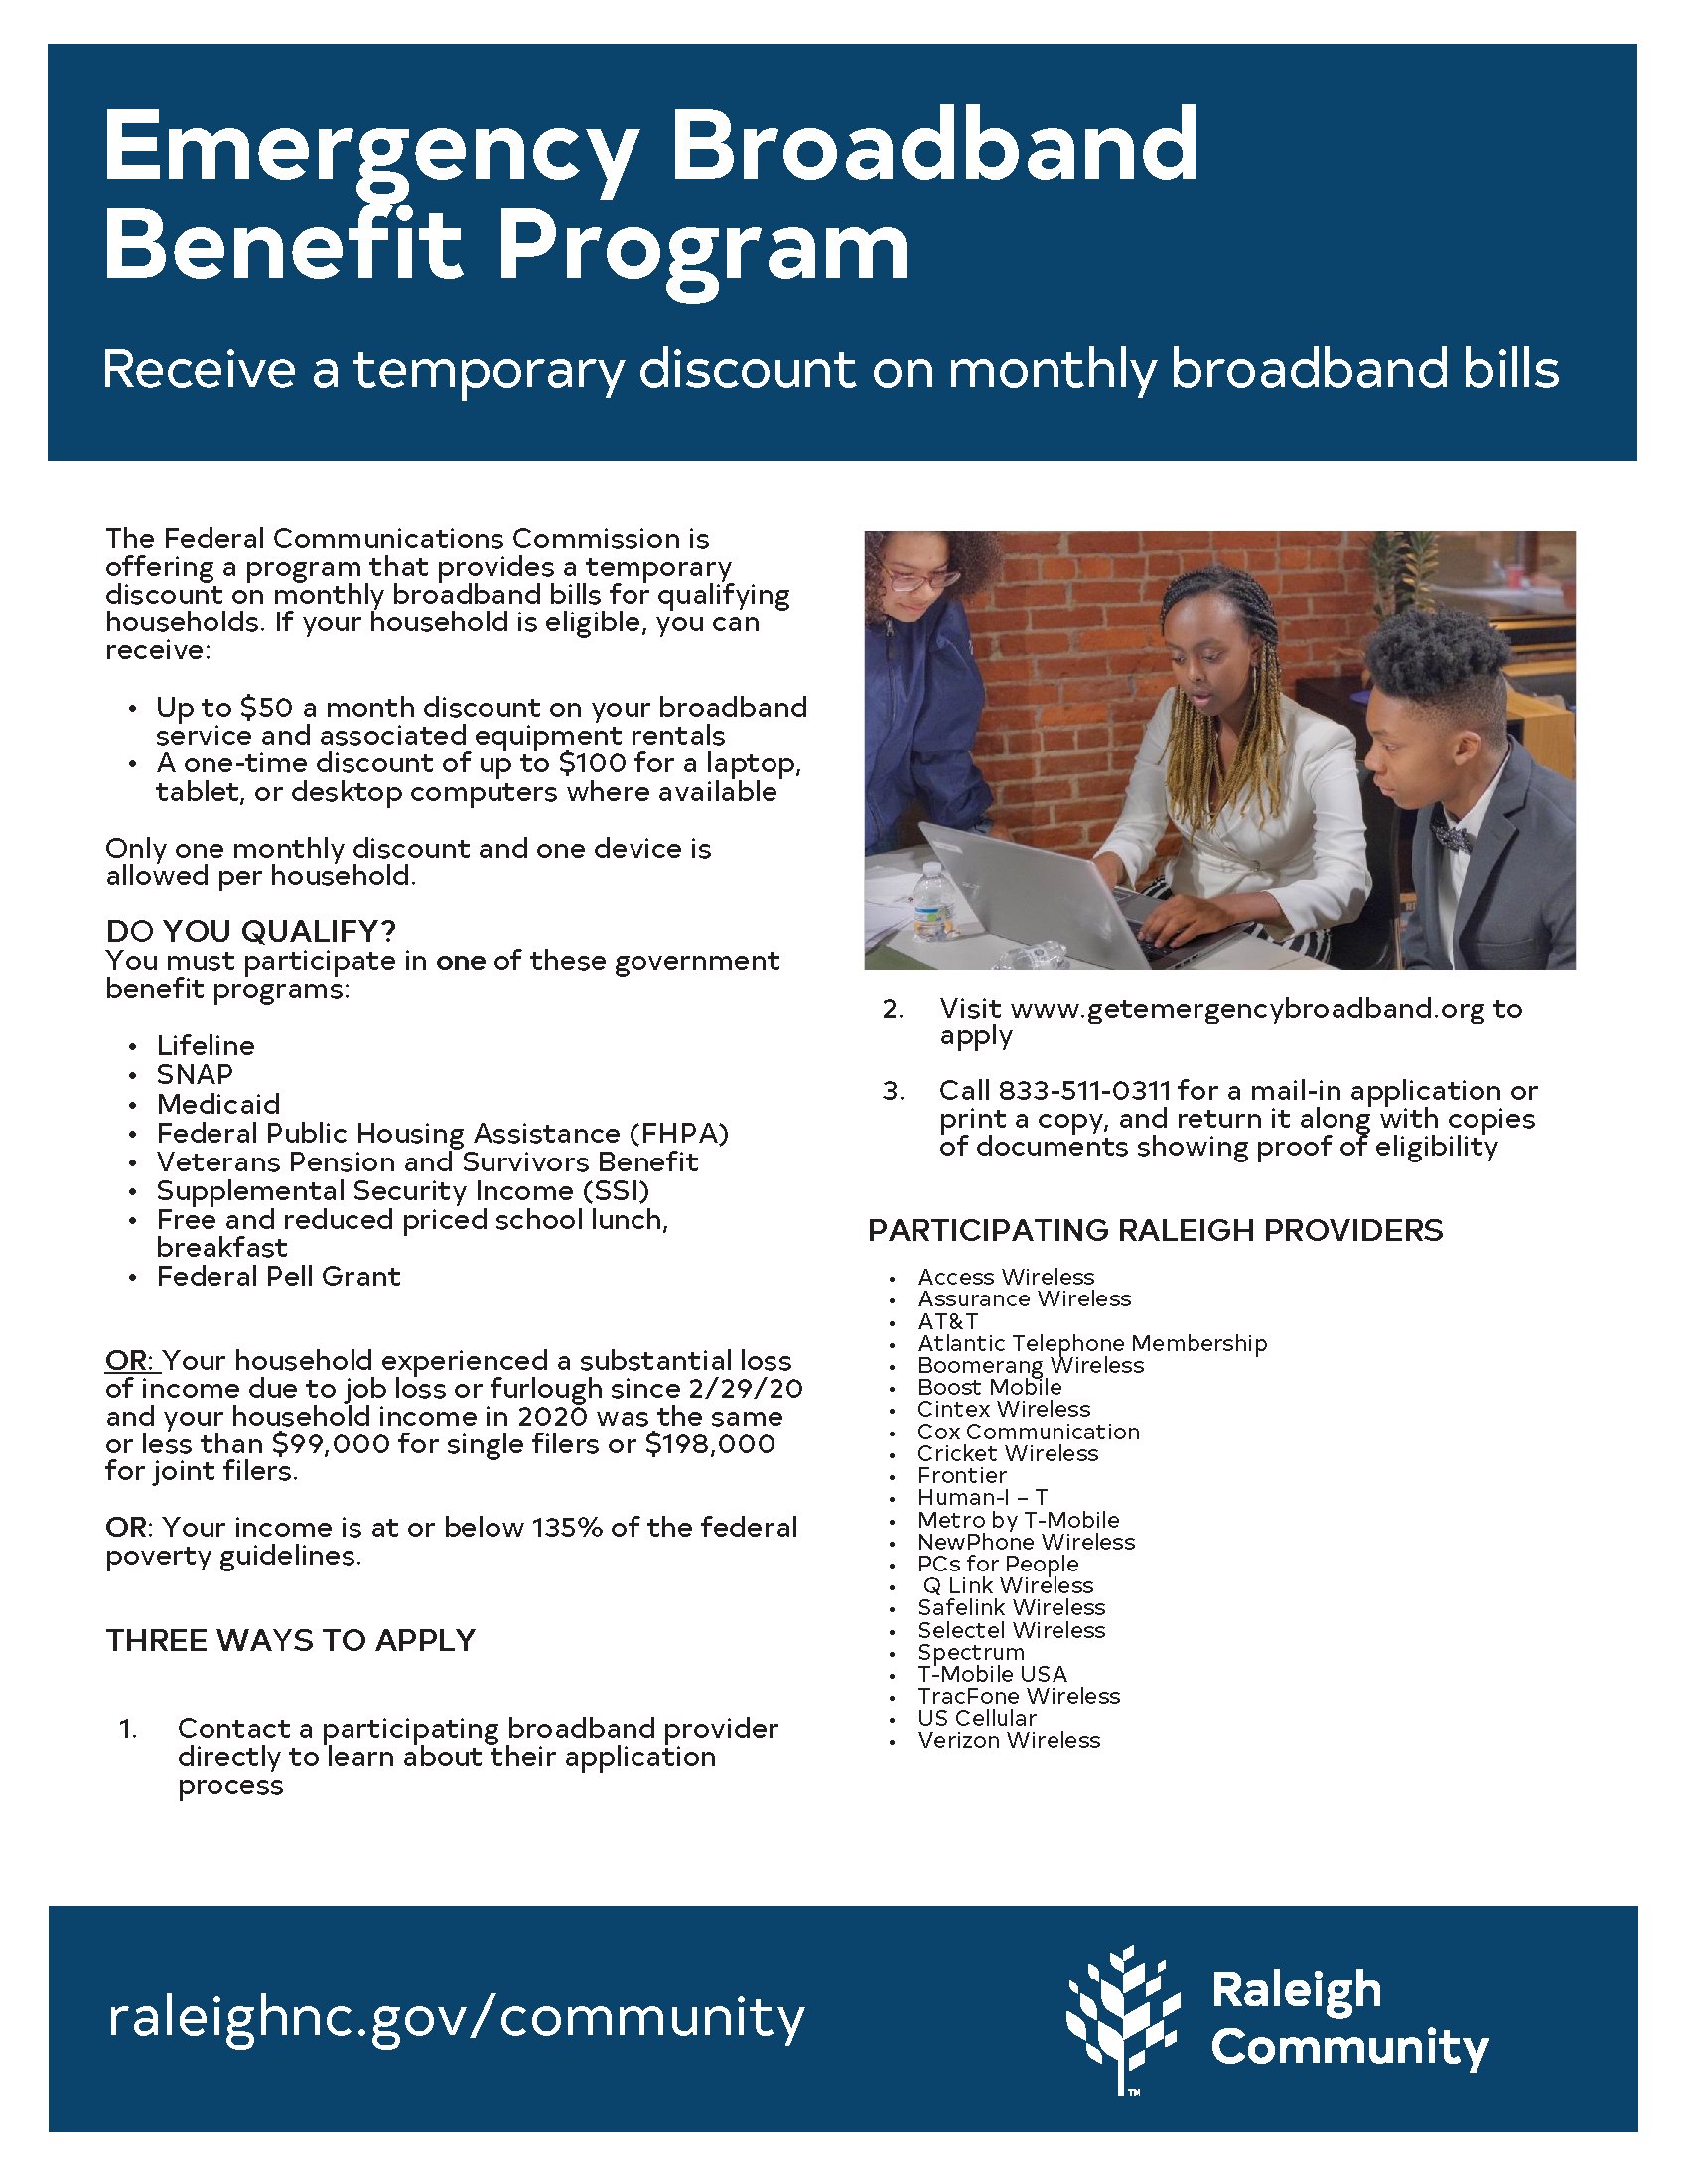 How to Quickly Apply for Emergency Broadband Benefit Program with Spectrum